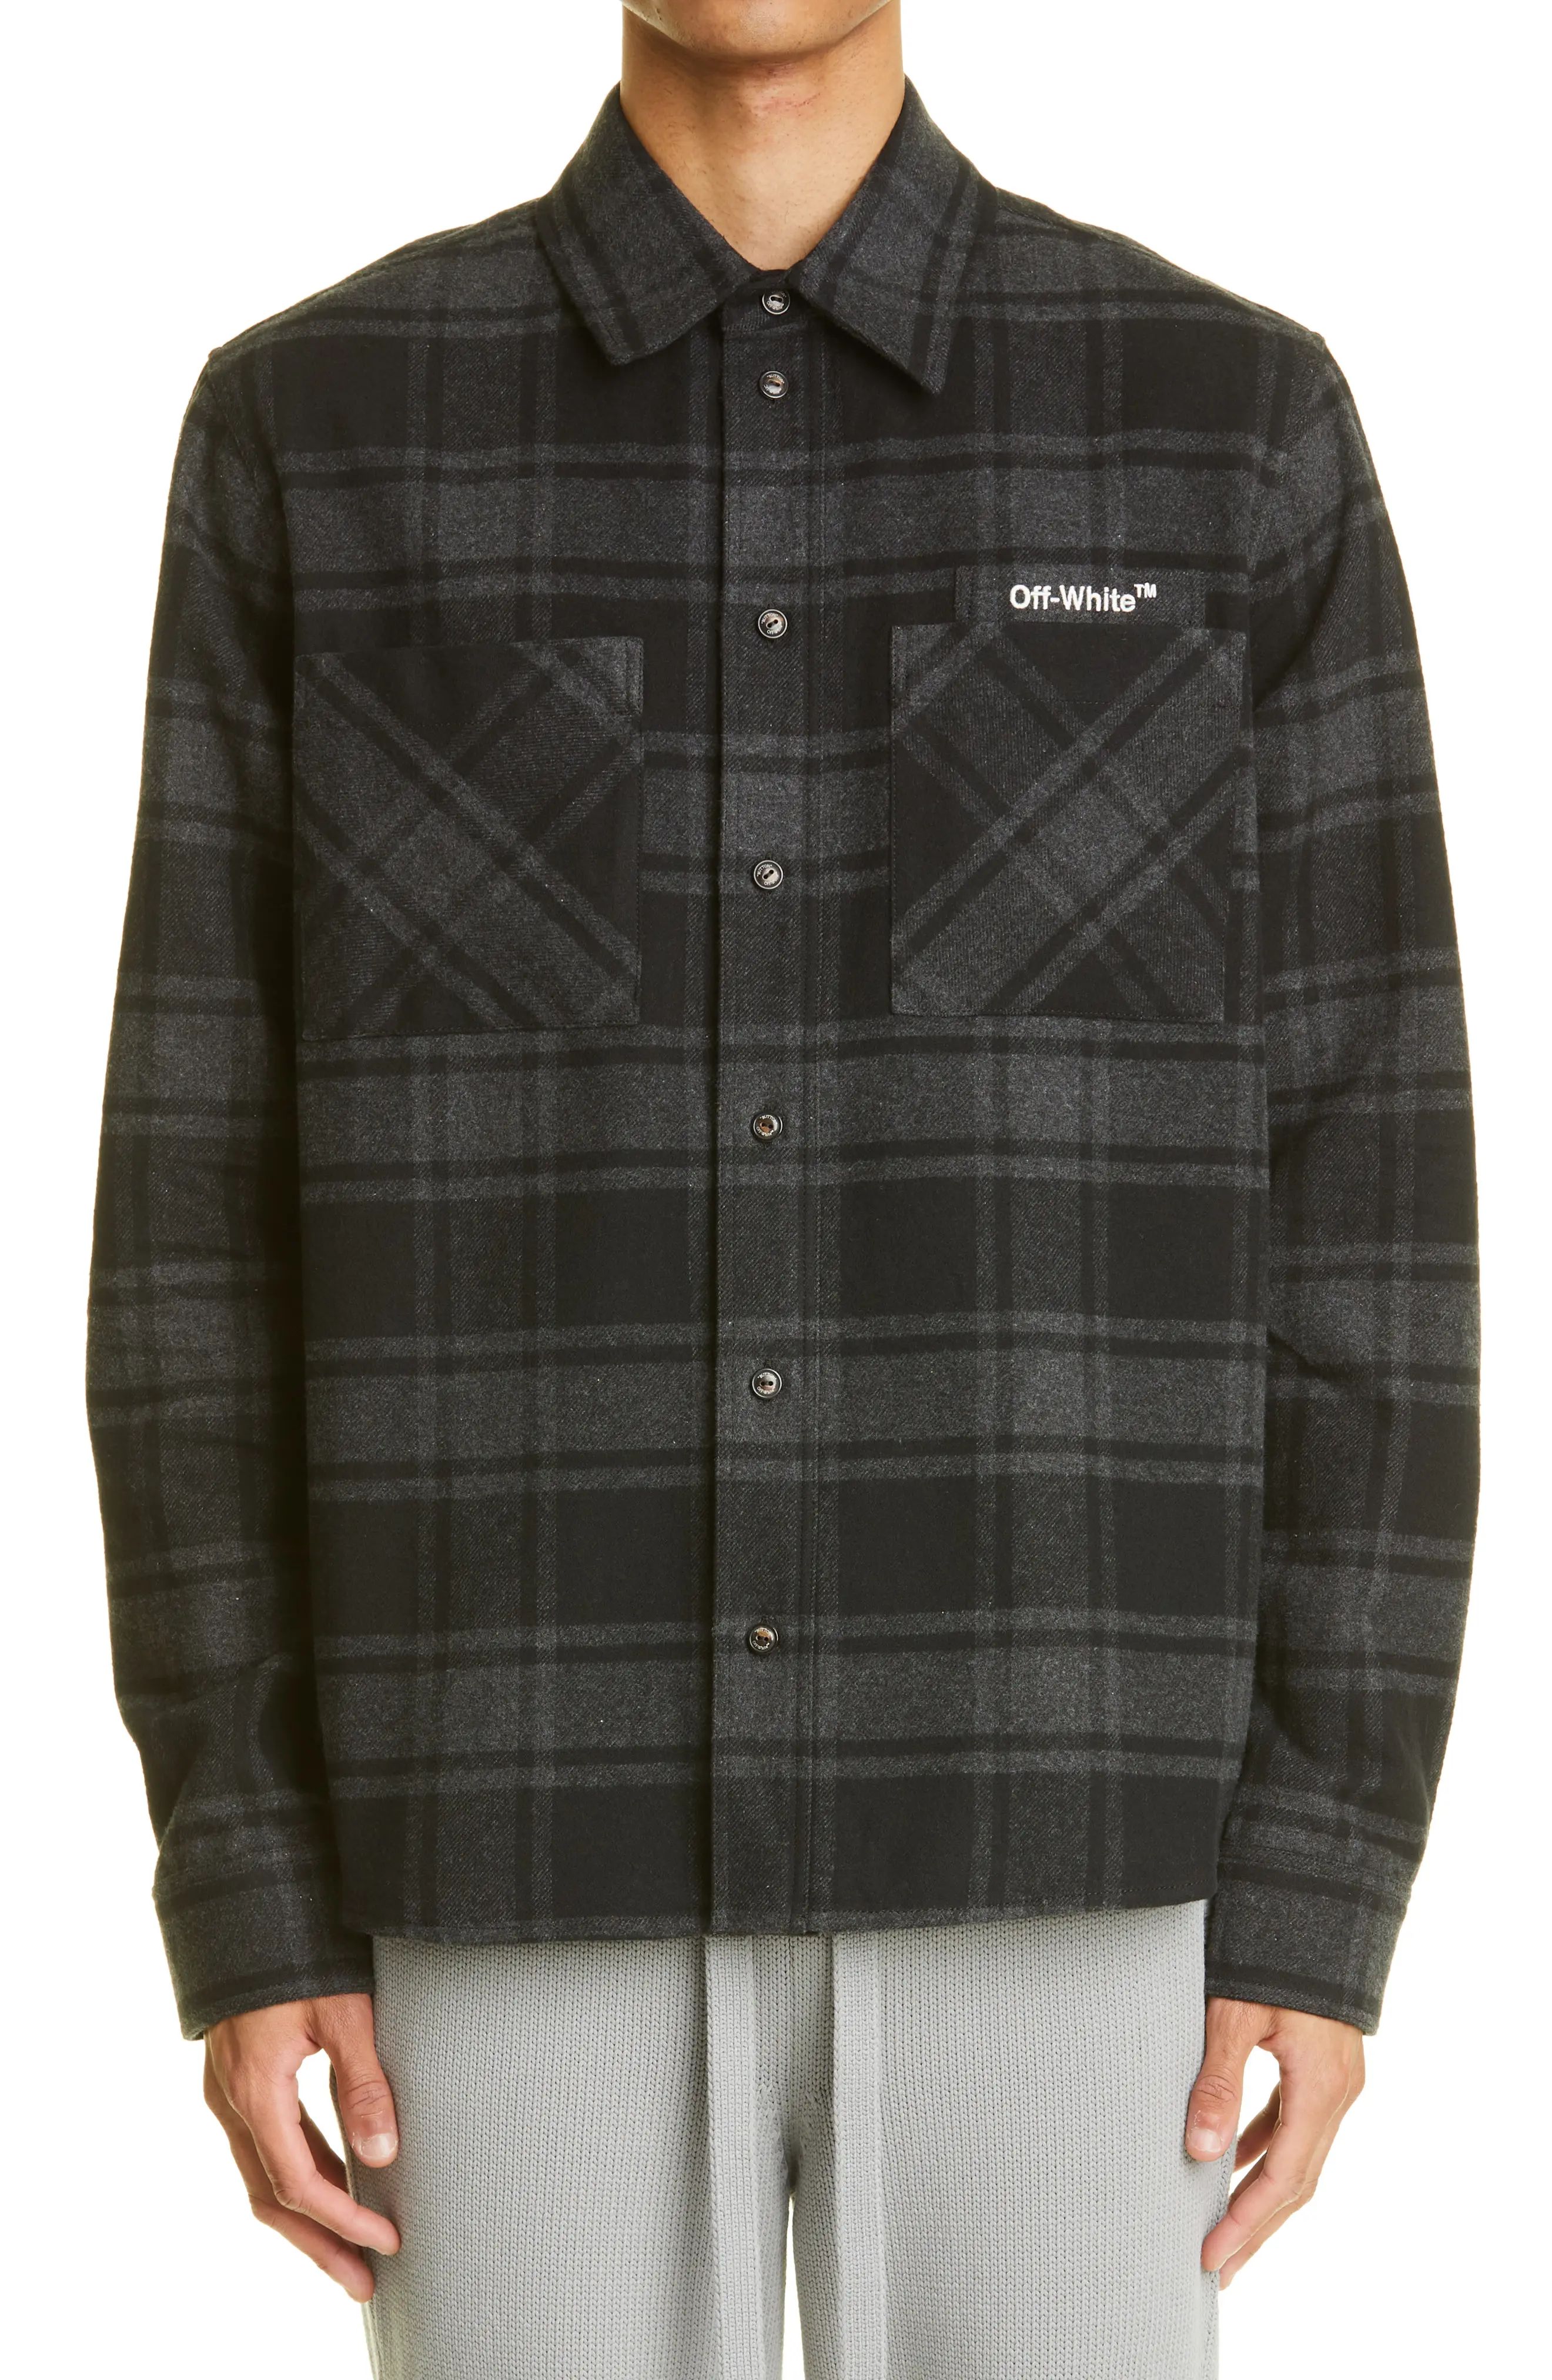 Off-White Arrows Check Flannel Button-Up Shirt in Grey/Black at Nordstrom, Size Medium | Nordstrom